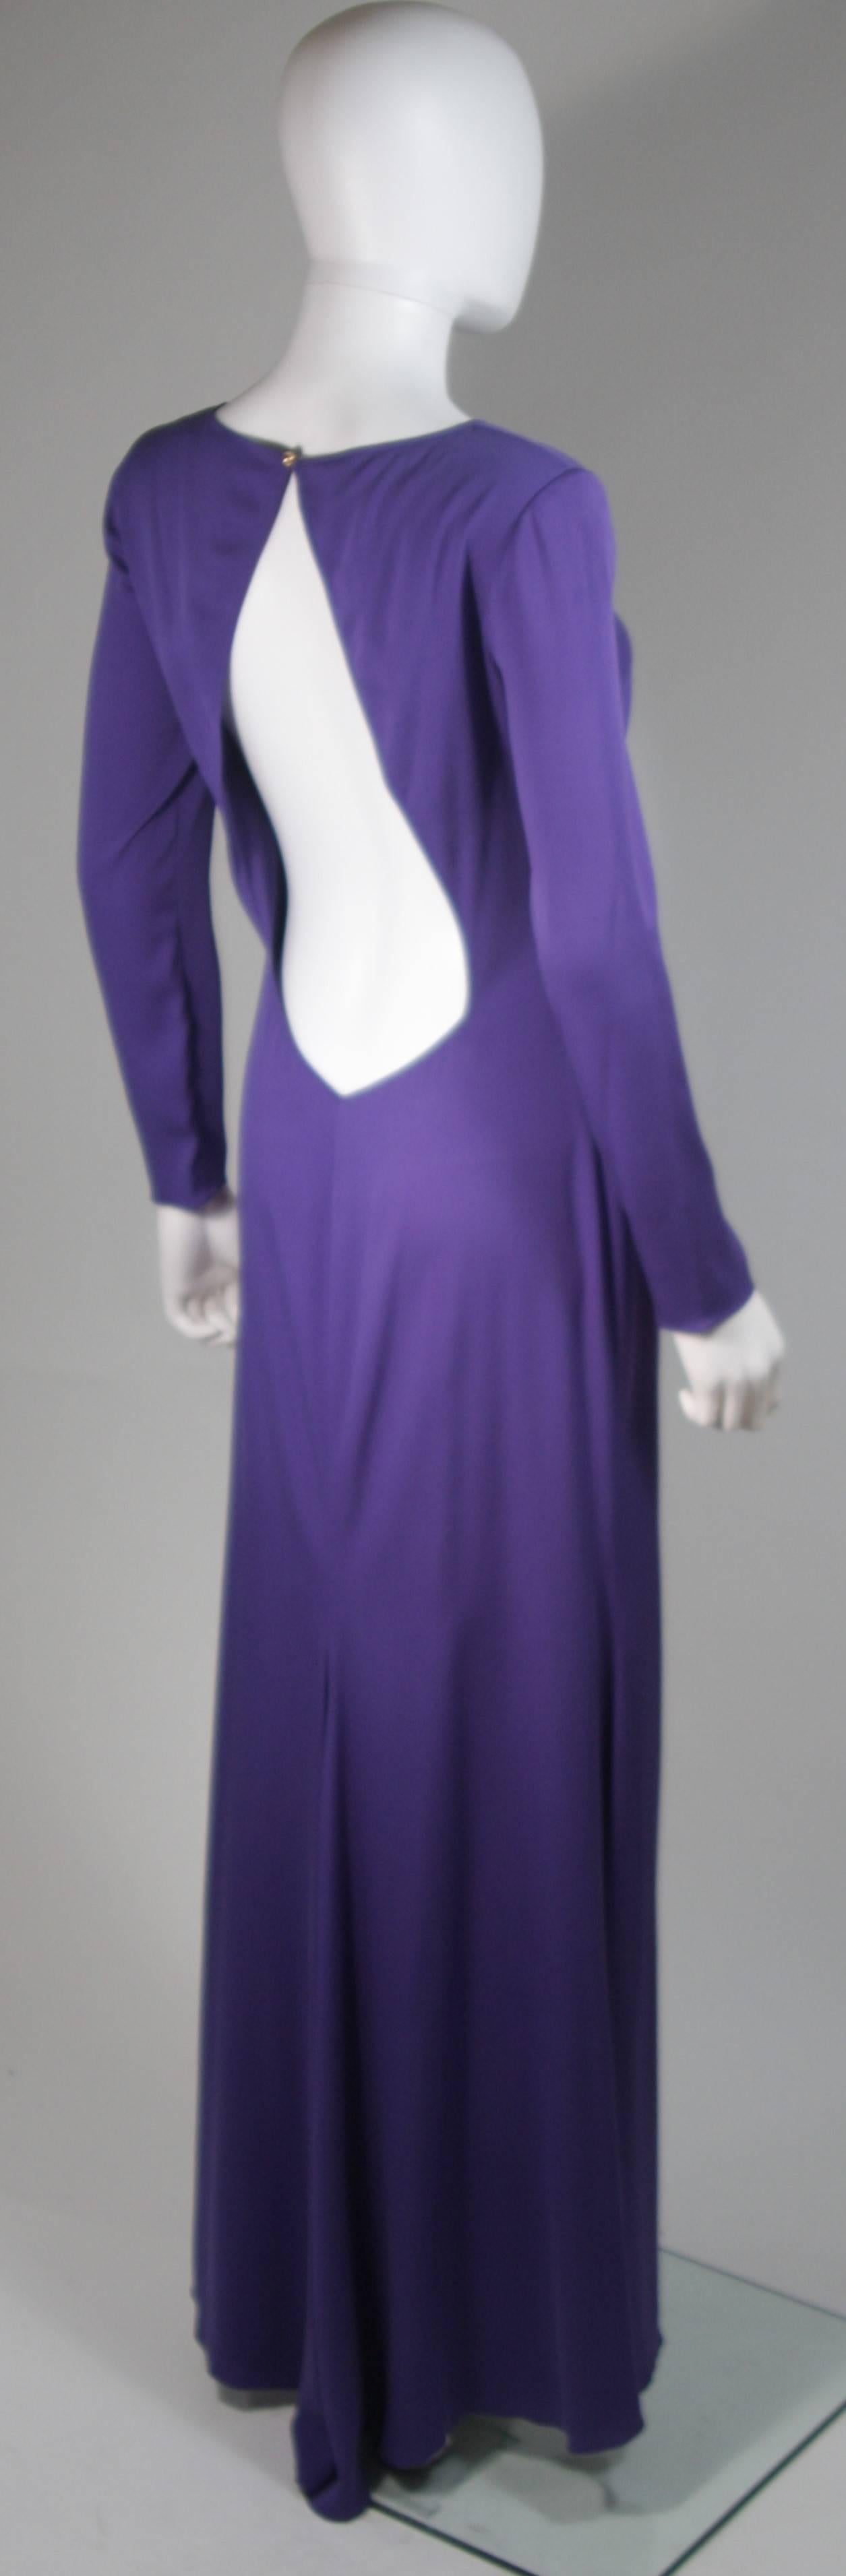 Emilio Pucci Purple Silk Long Sleeve Gown with Open Back Size Medium Large In Excellent Condition For Sale In Los Angeles, CA